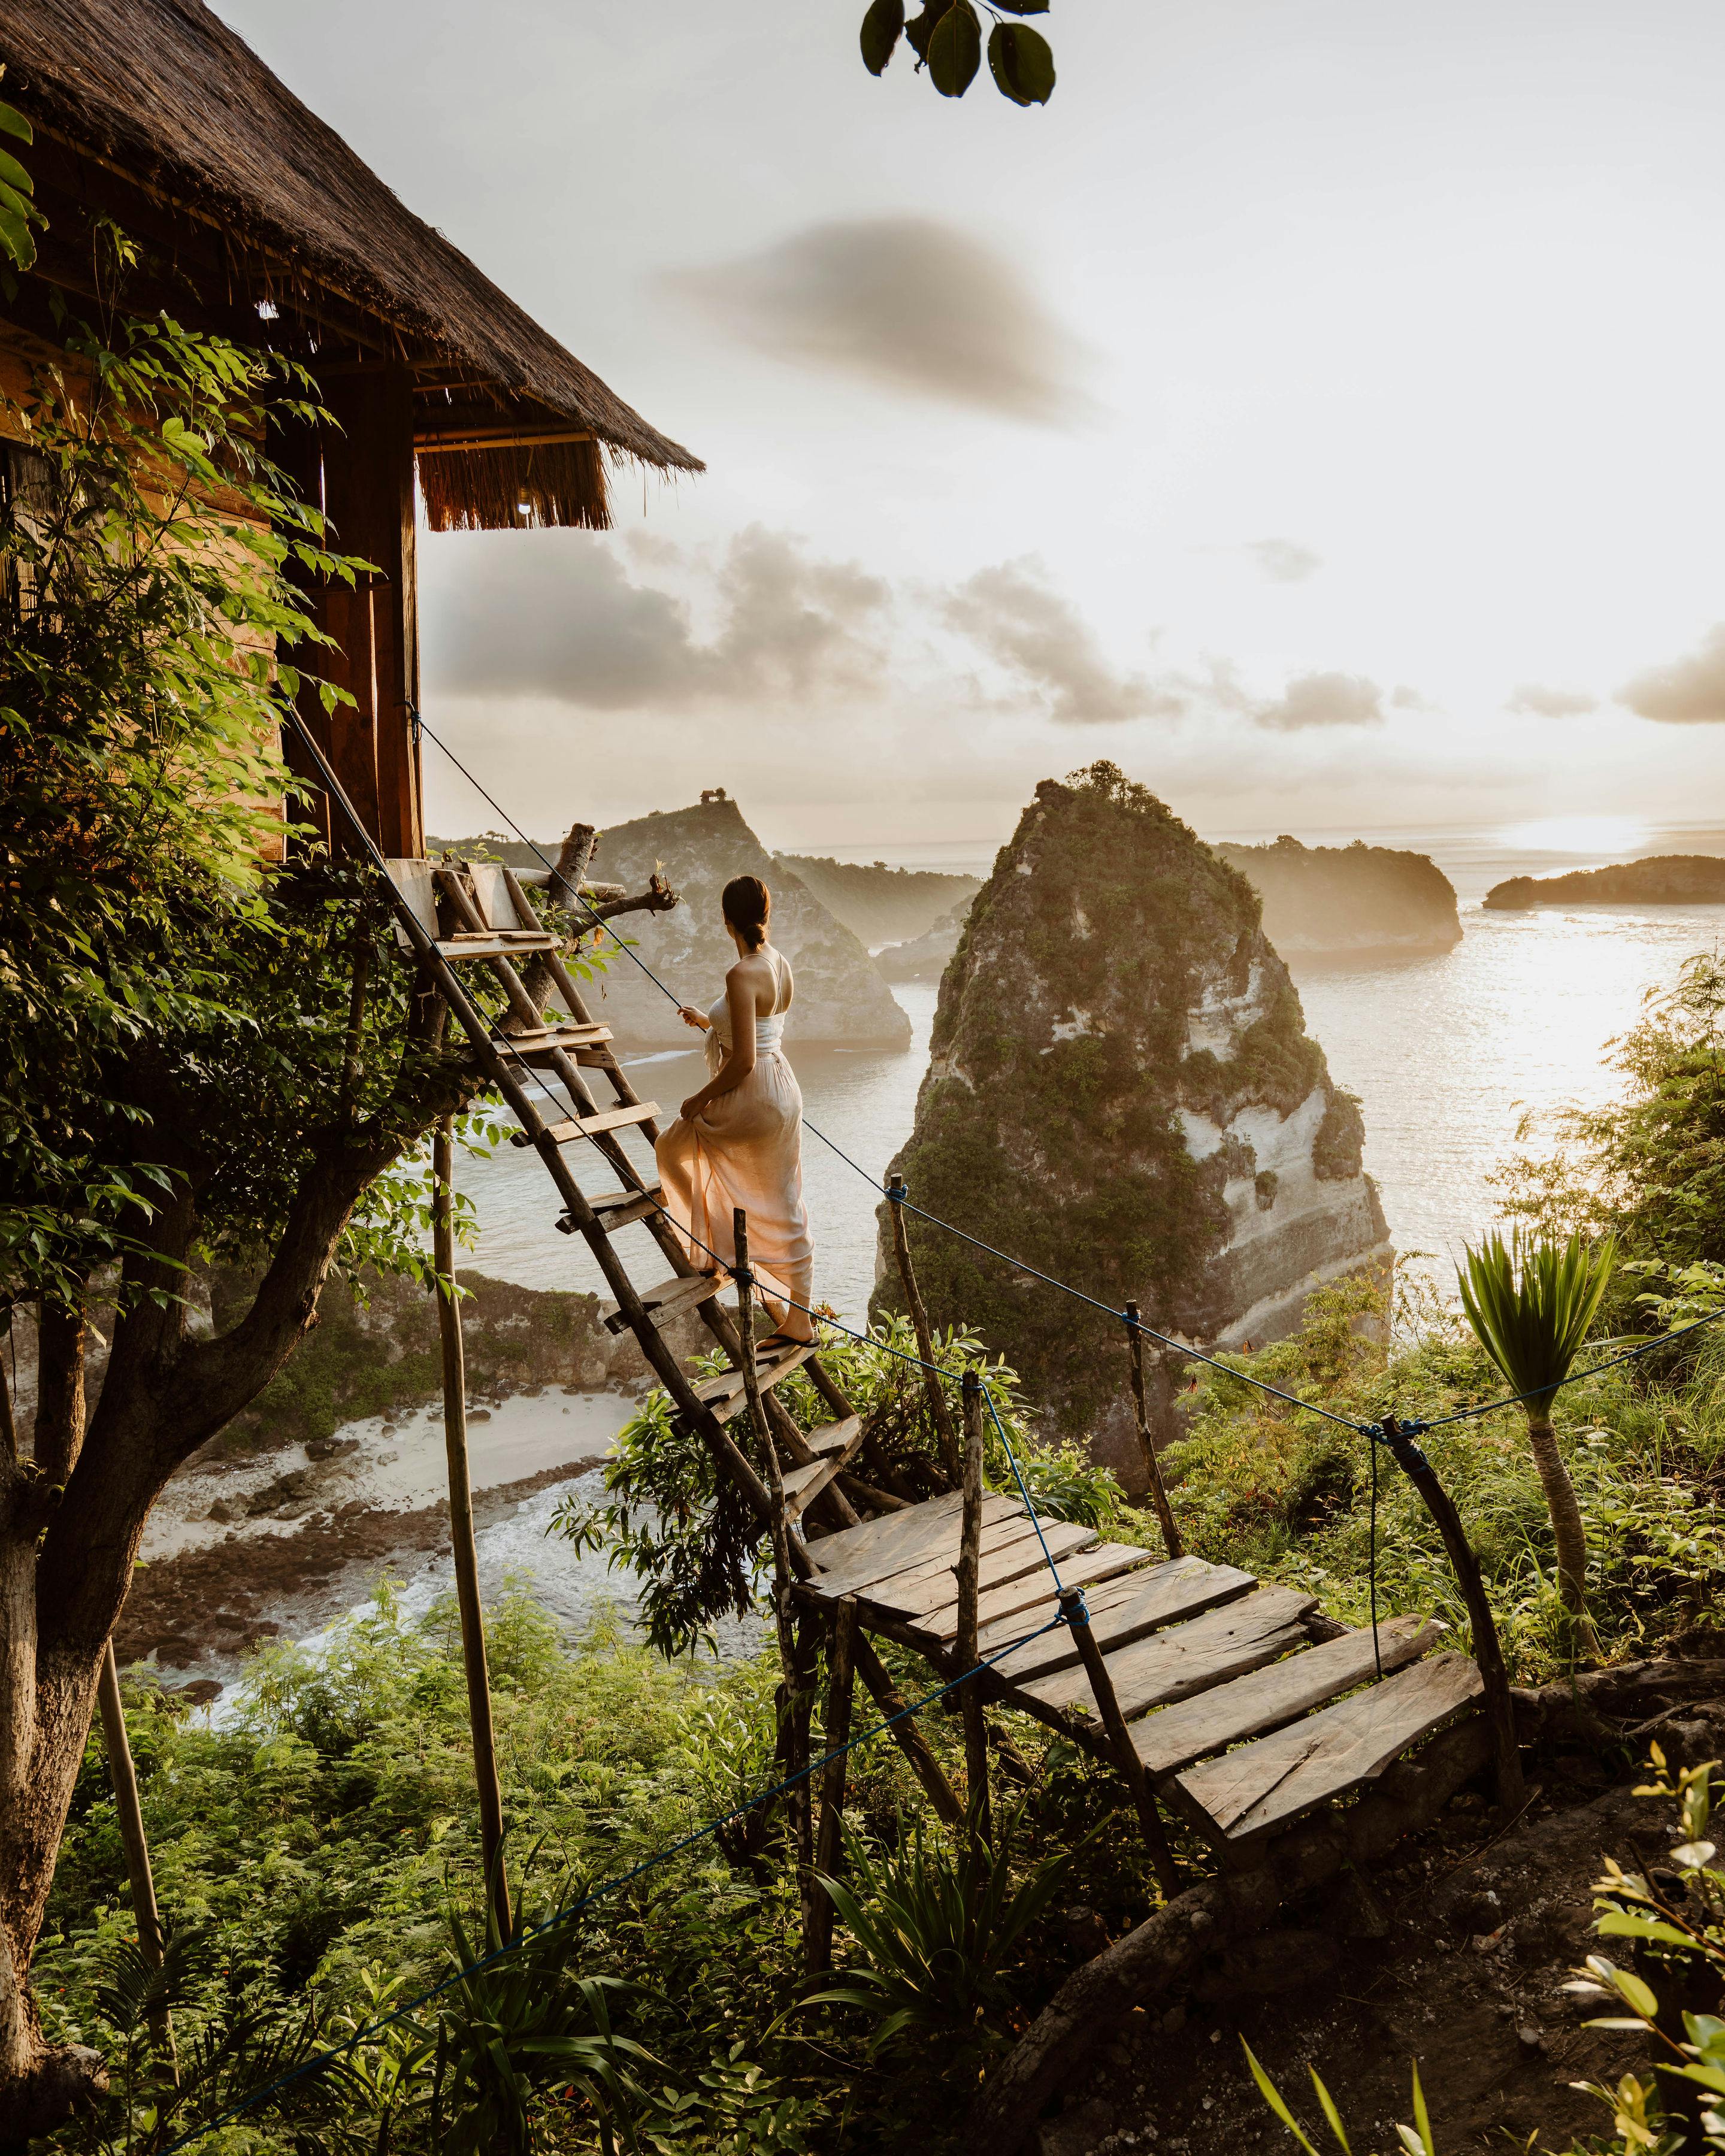 The IG popular view from the Nusa Penida treehouse at Diamond Beach